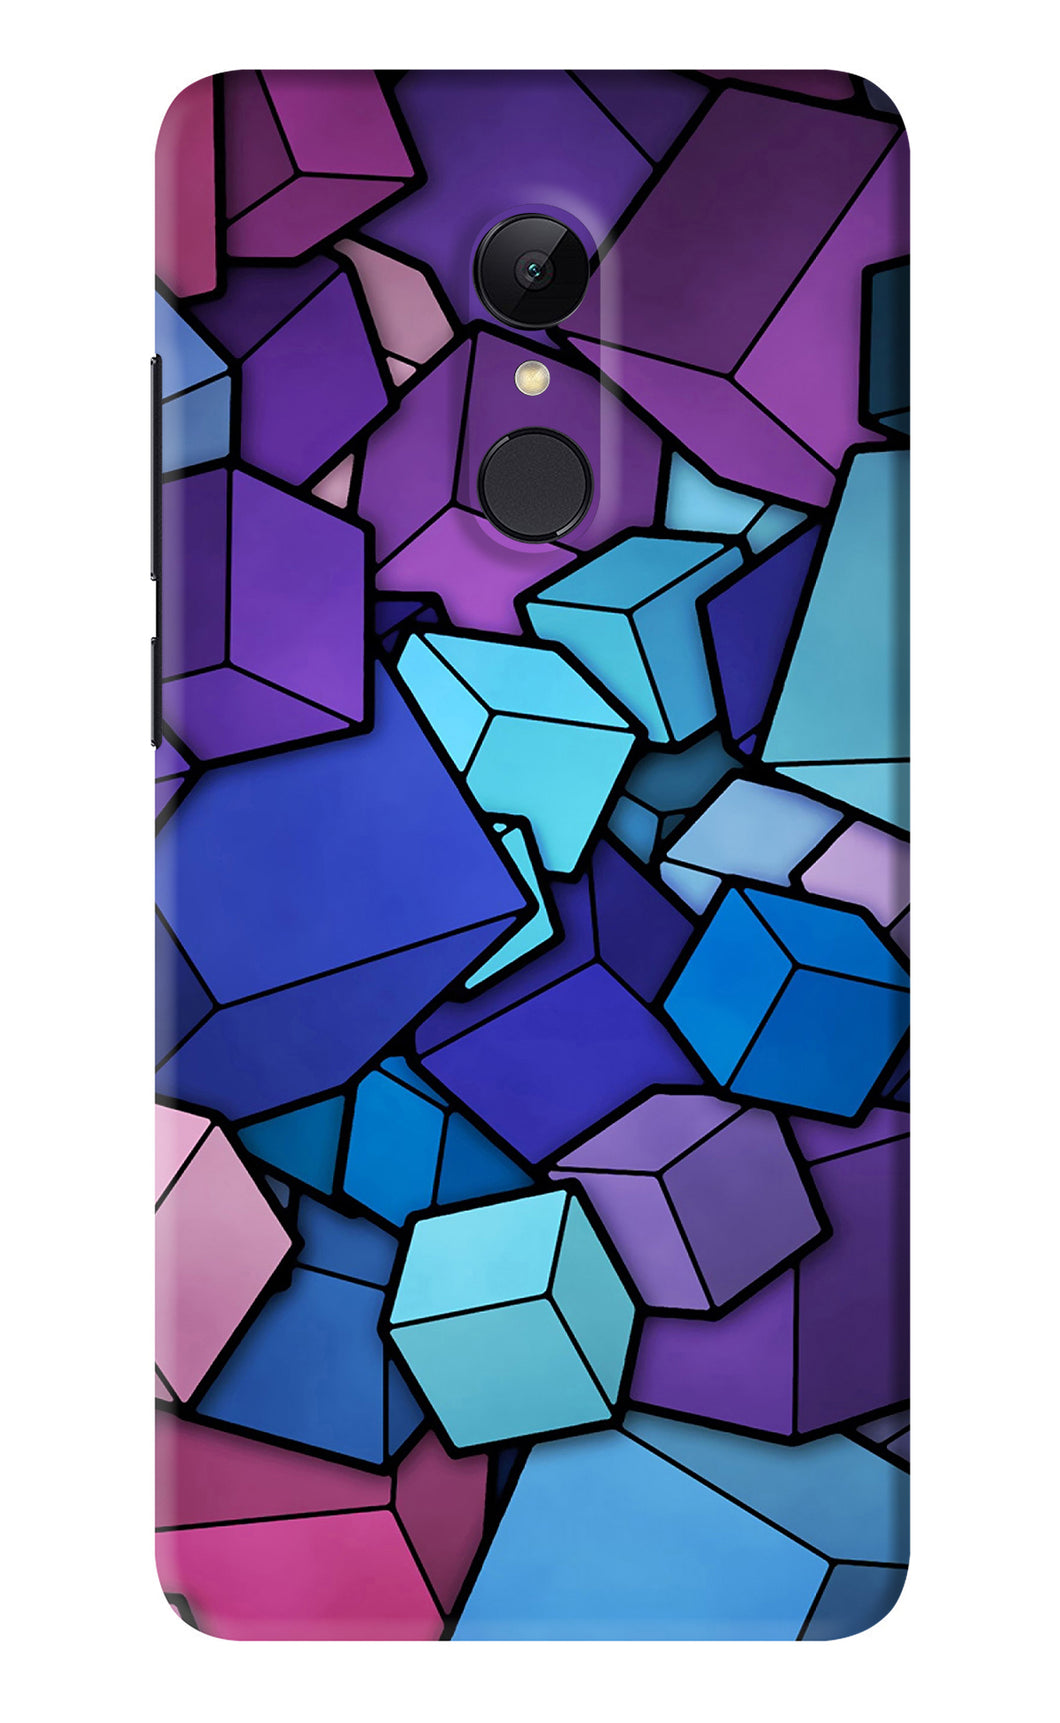 Cubic Abstract Xiaomi Redmi Note 4 Back Skin Wrap